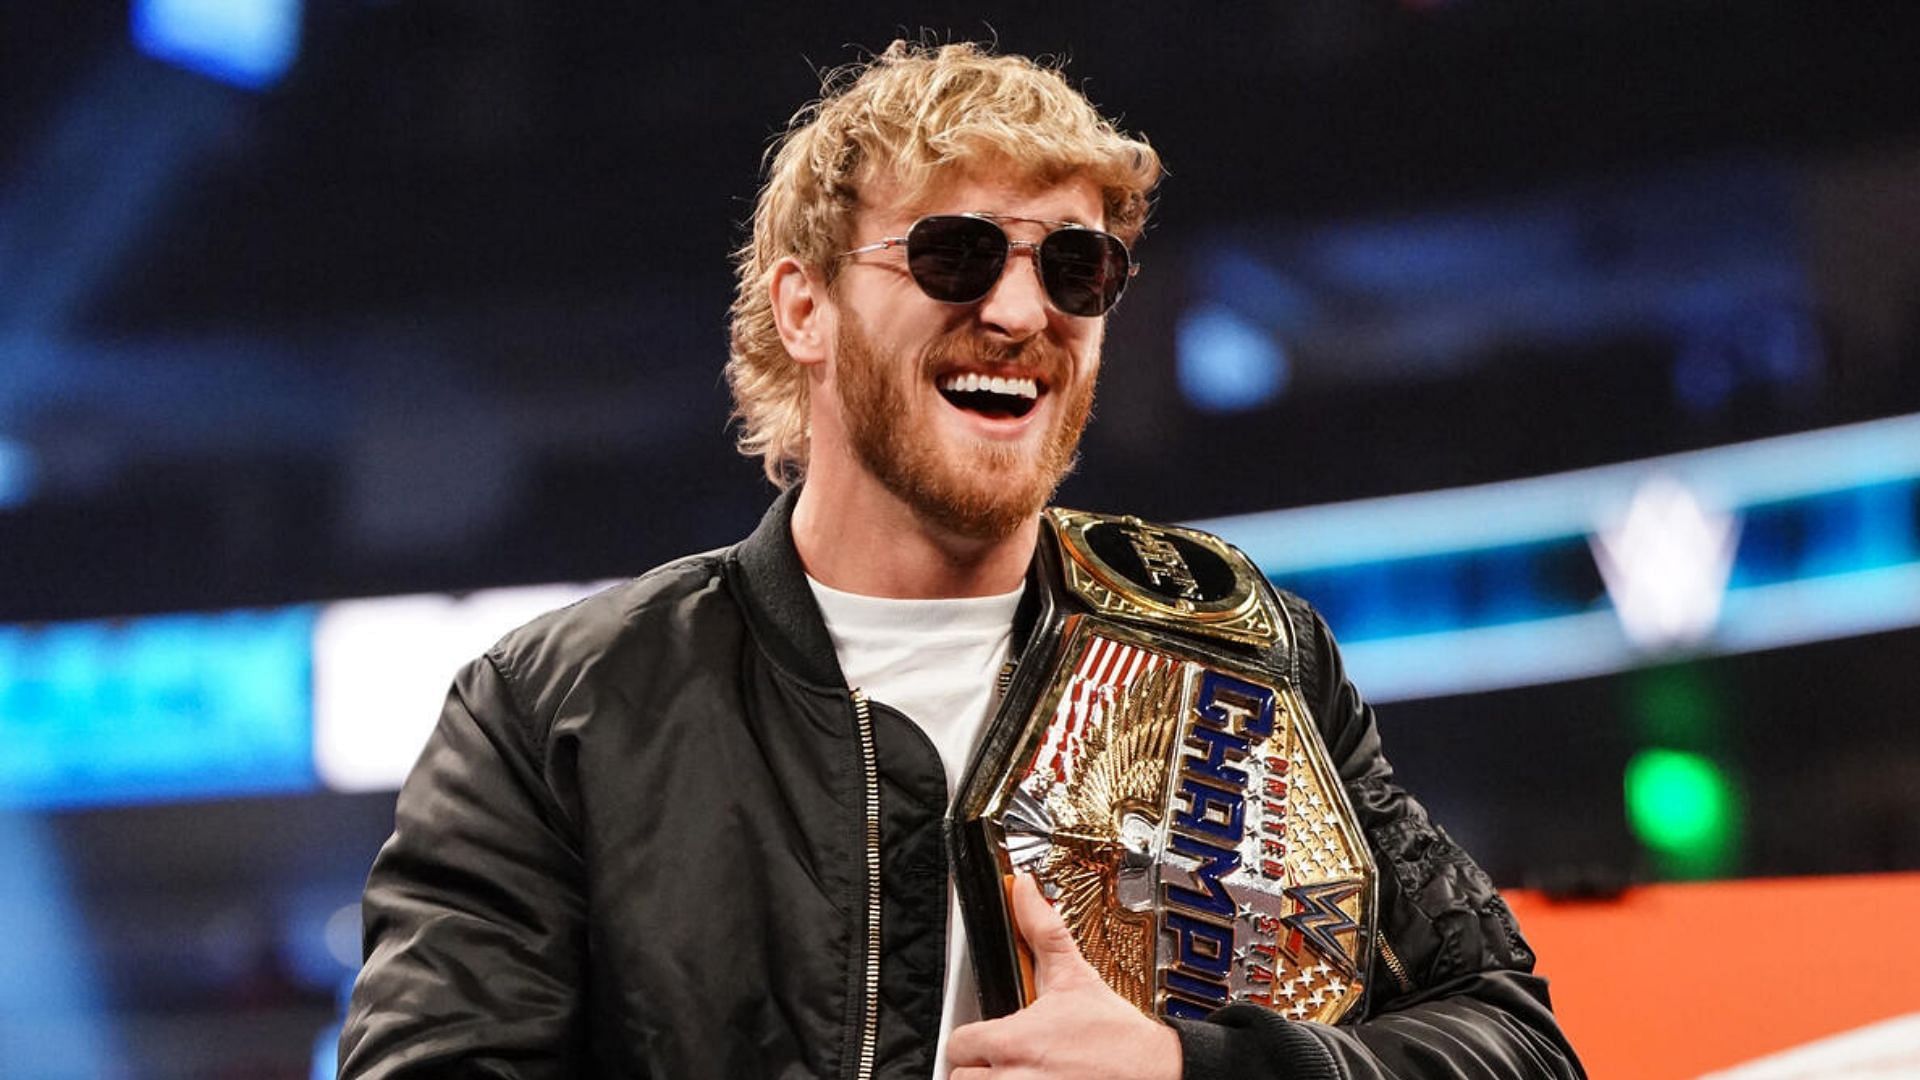 Logan Paul has crossed over 190 days as US Champion with 2 title defenses!